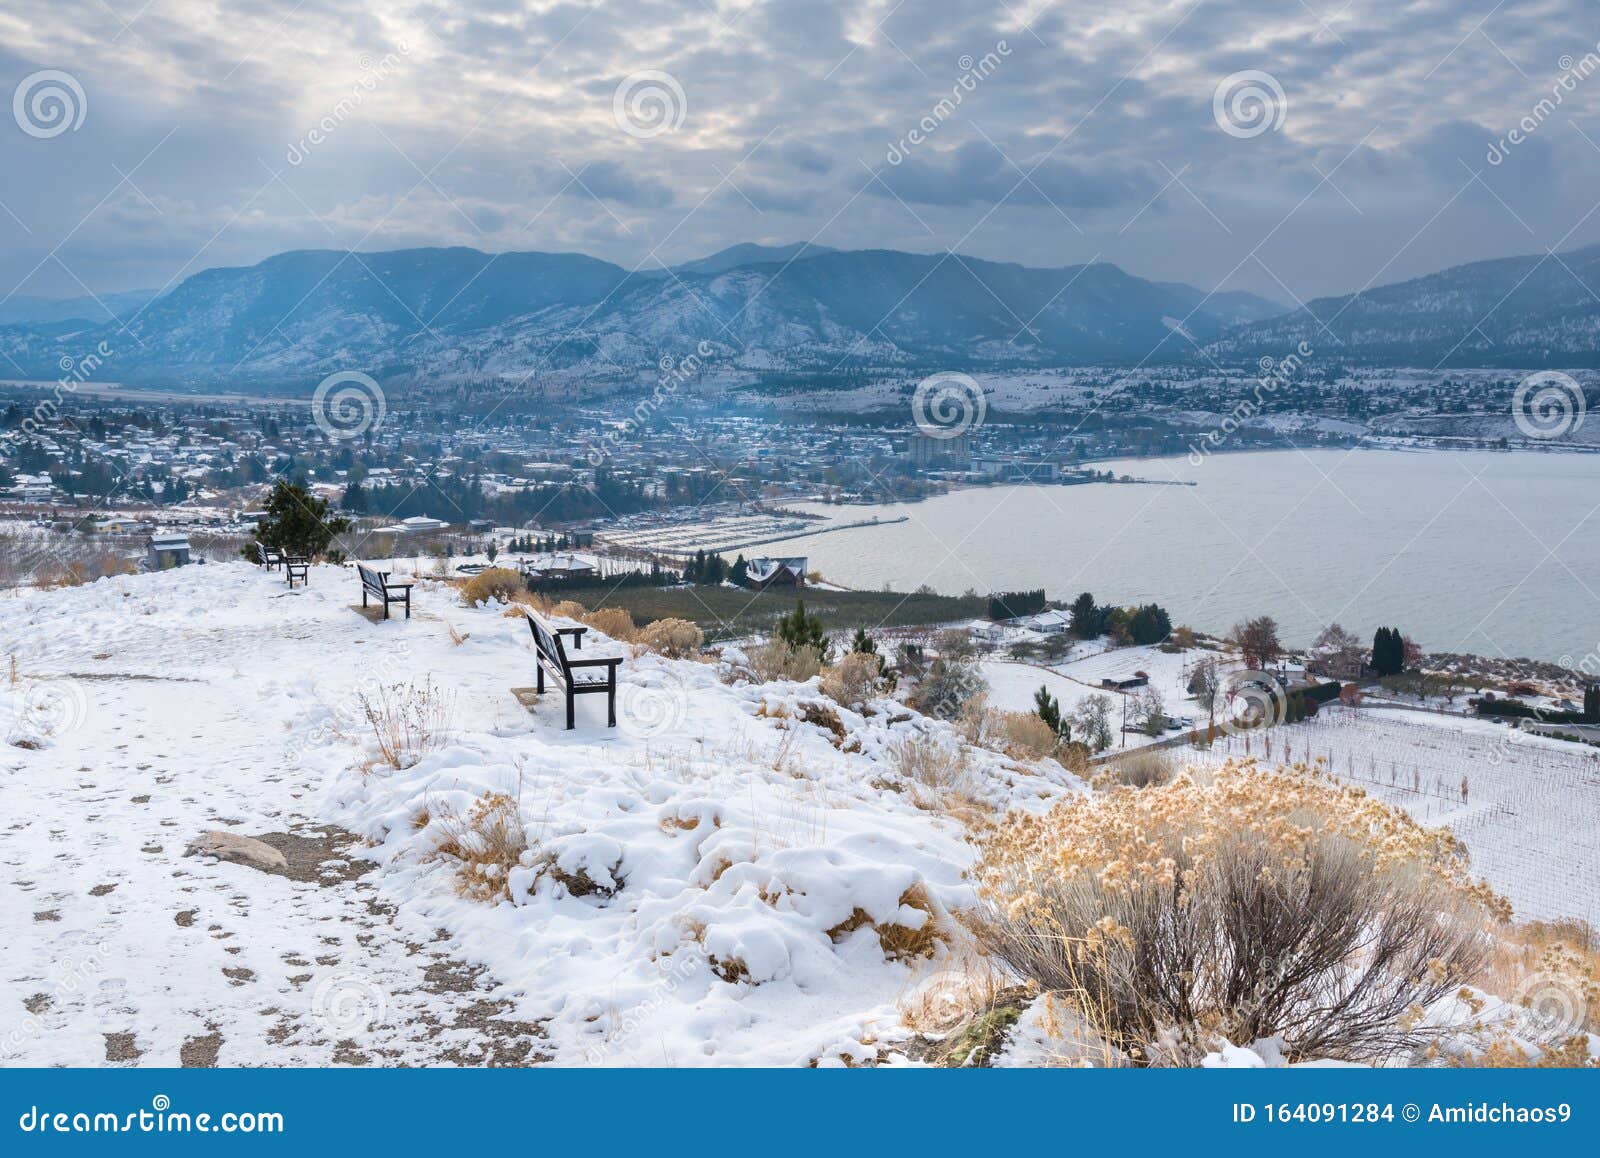 winter view of penticton covered in snow with view of okanagan lake and mountains